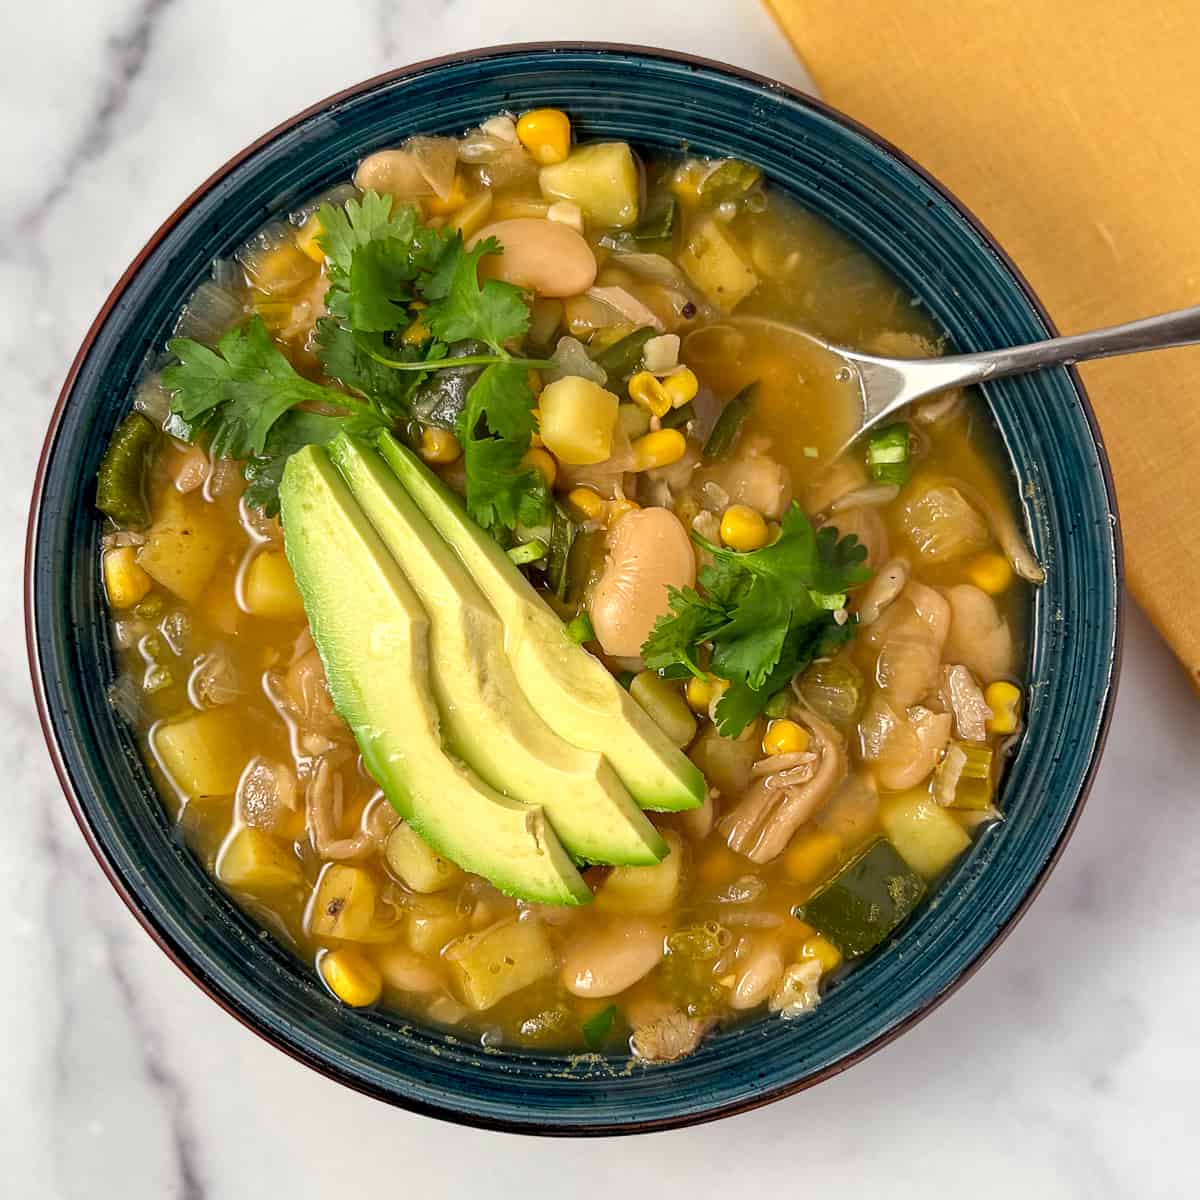 A bowl of vegan white bean chili topped with fresh cilantro and sliced avocado with a spoon on the side.